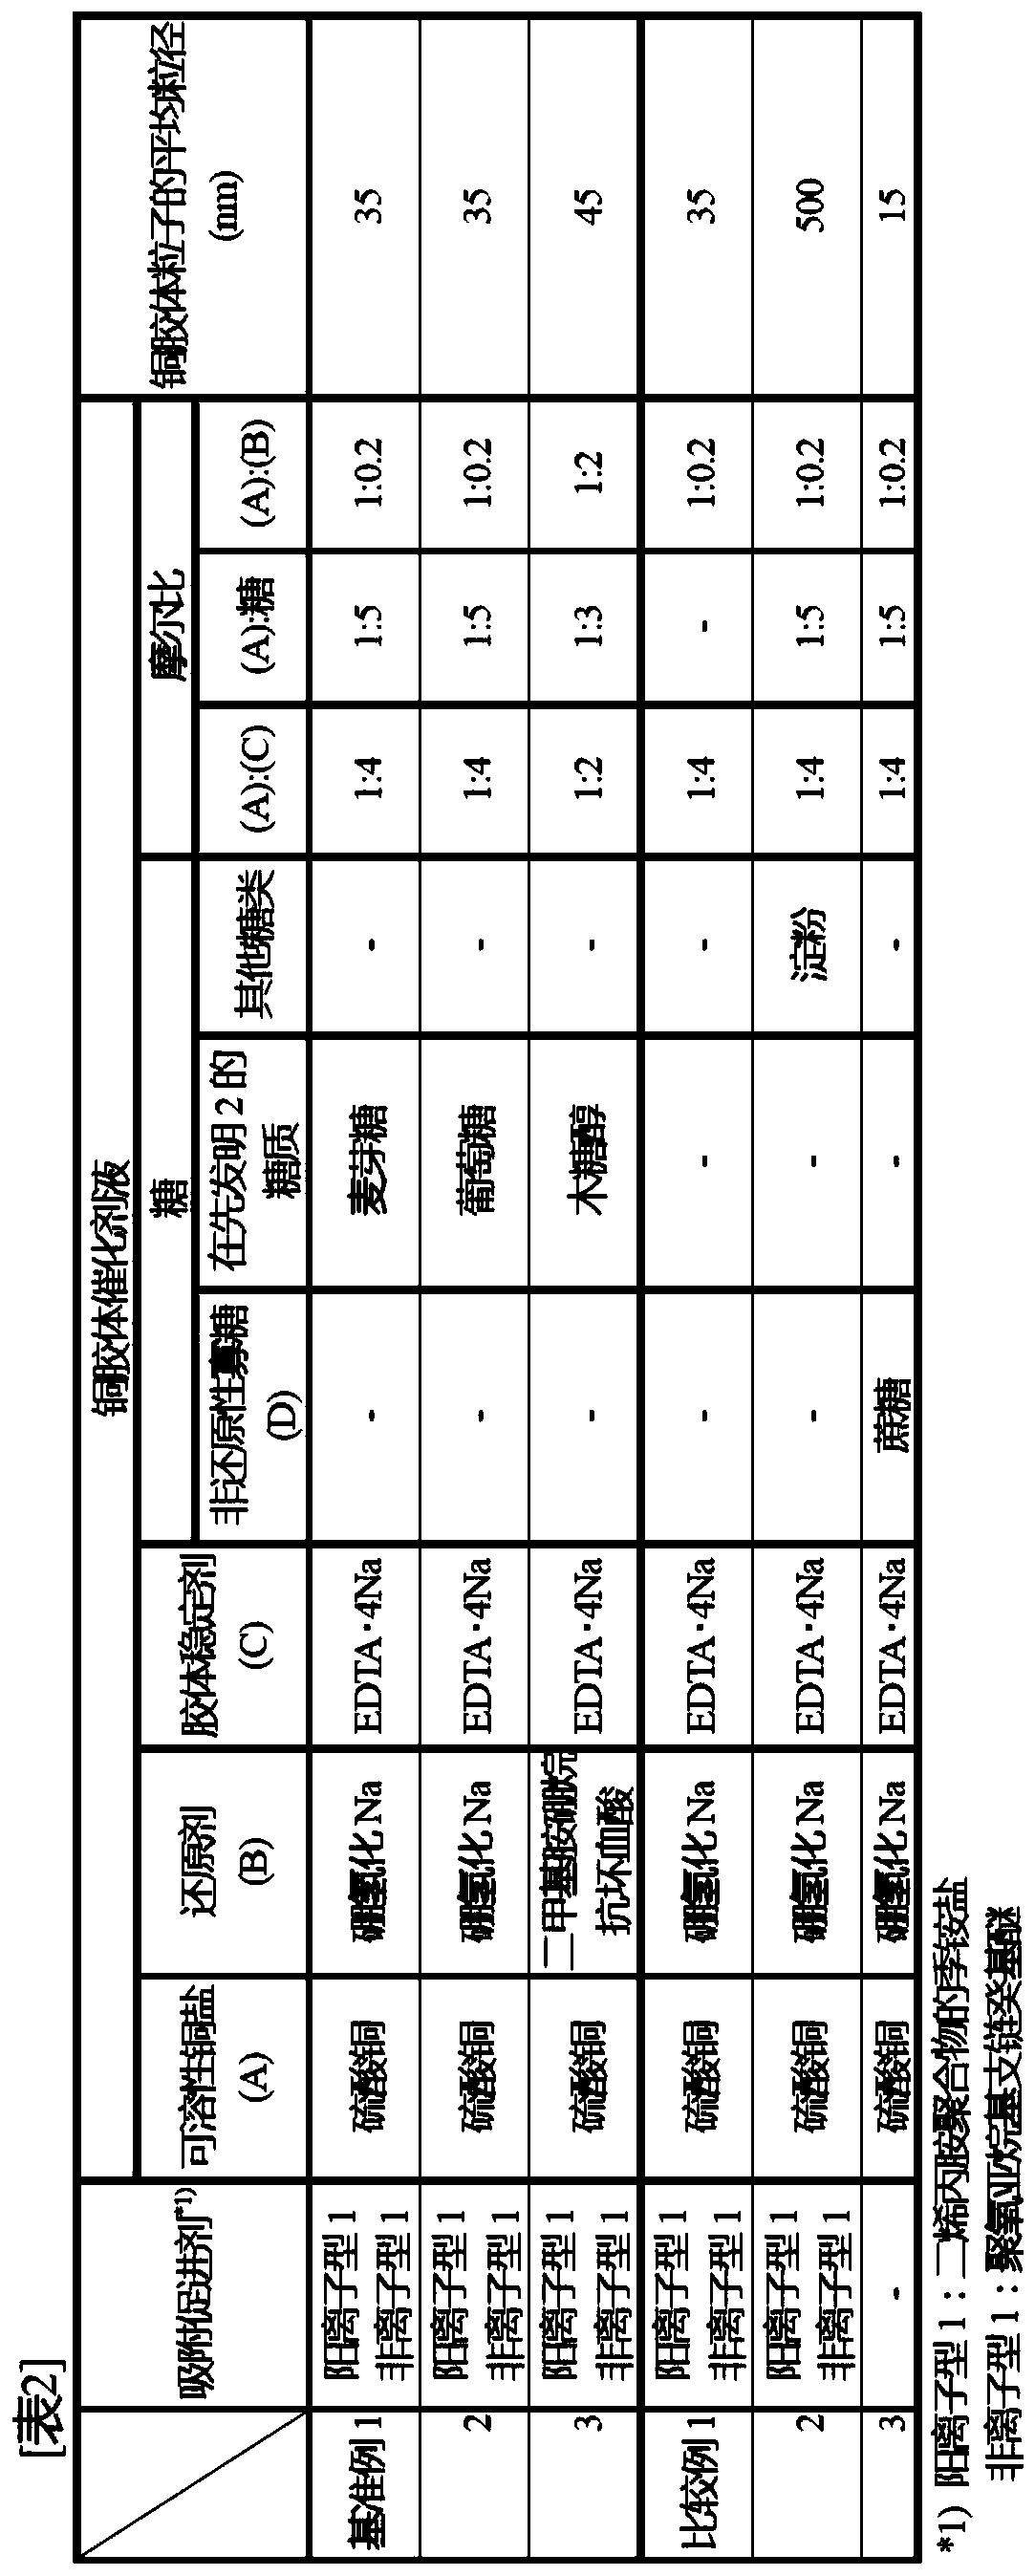 Copper colloidal catalyst liquid for electroless copper plating, electroless copper plating method, and production method for copper-plated substrate